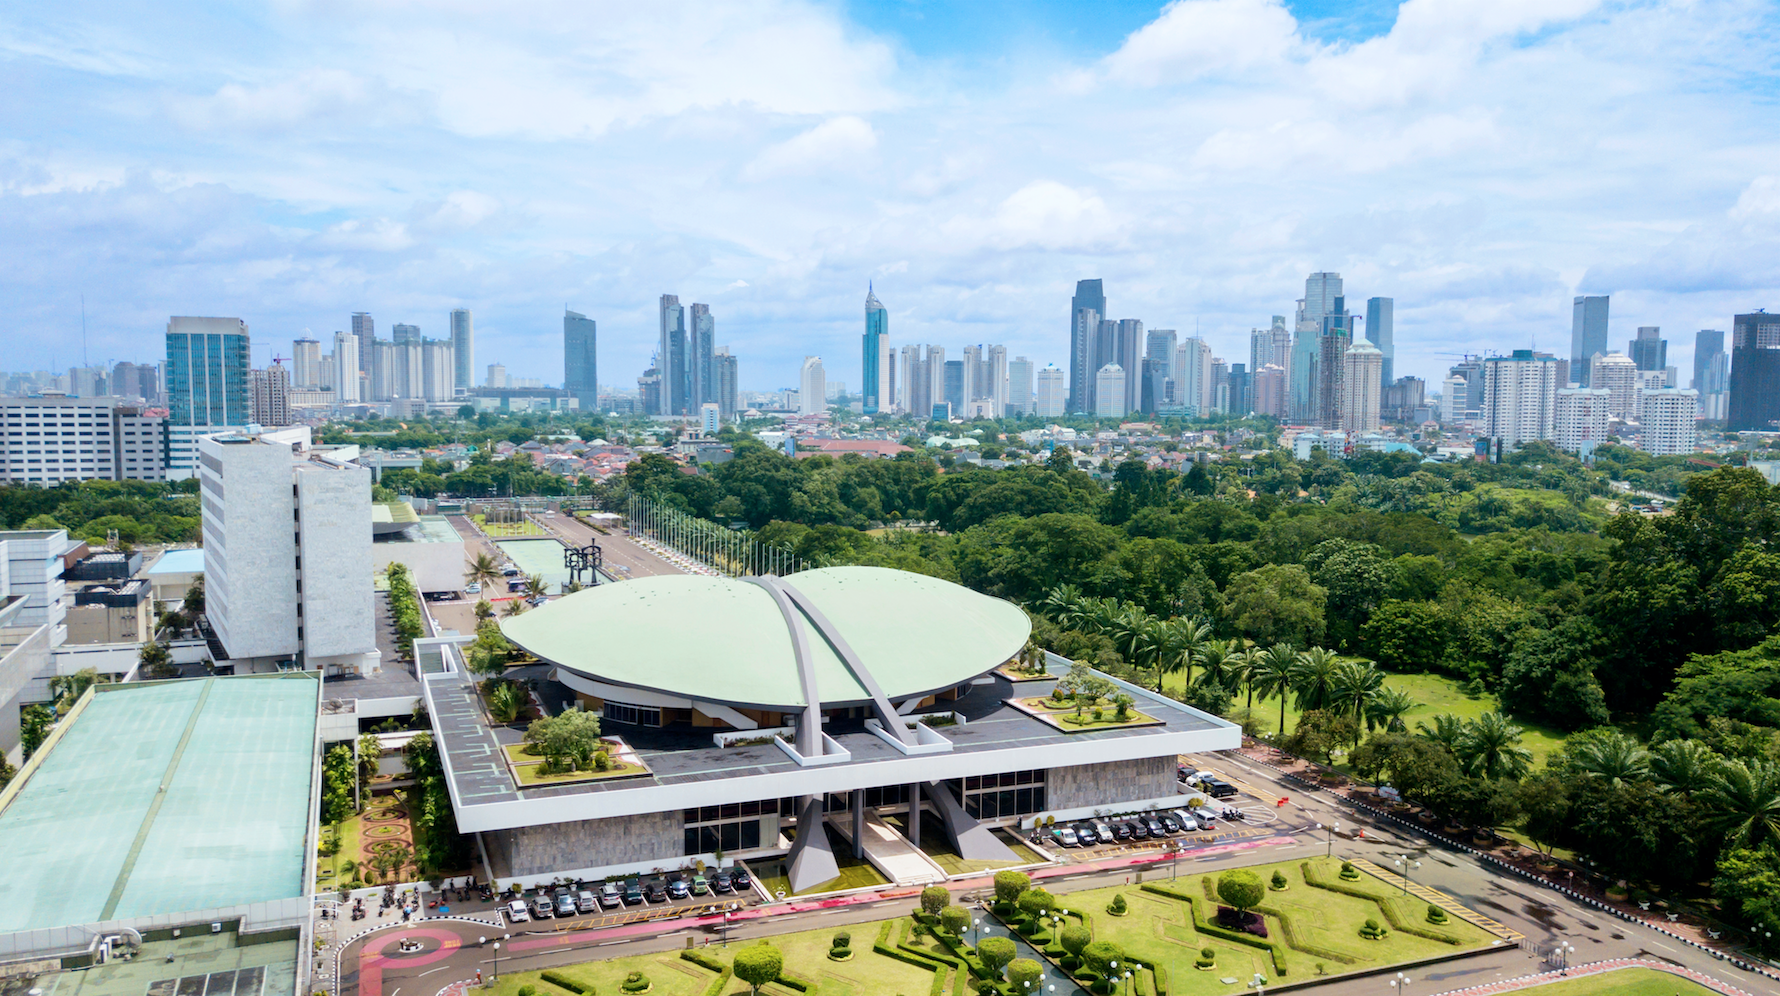 Aerial Image of the Indonesia Parliament Complex, also known as the DPR / MPR building, with Jakarta's cityscape at midday. Image by  Creativa Images / Shutterstock. Indonesia, 2018.